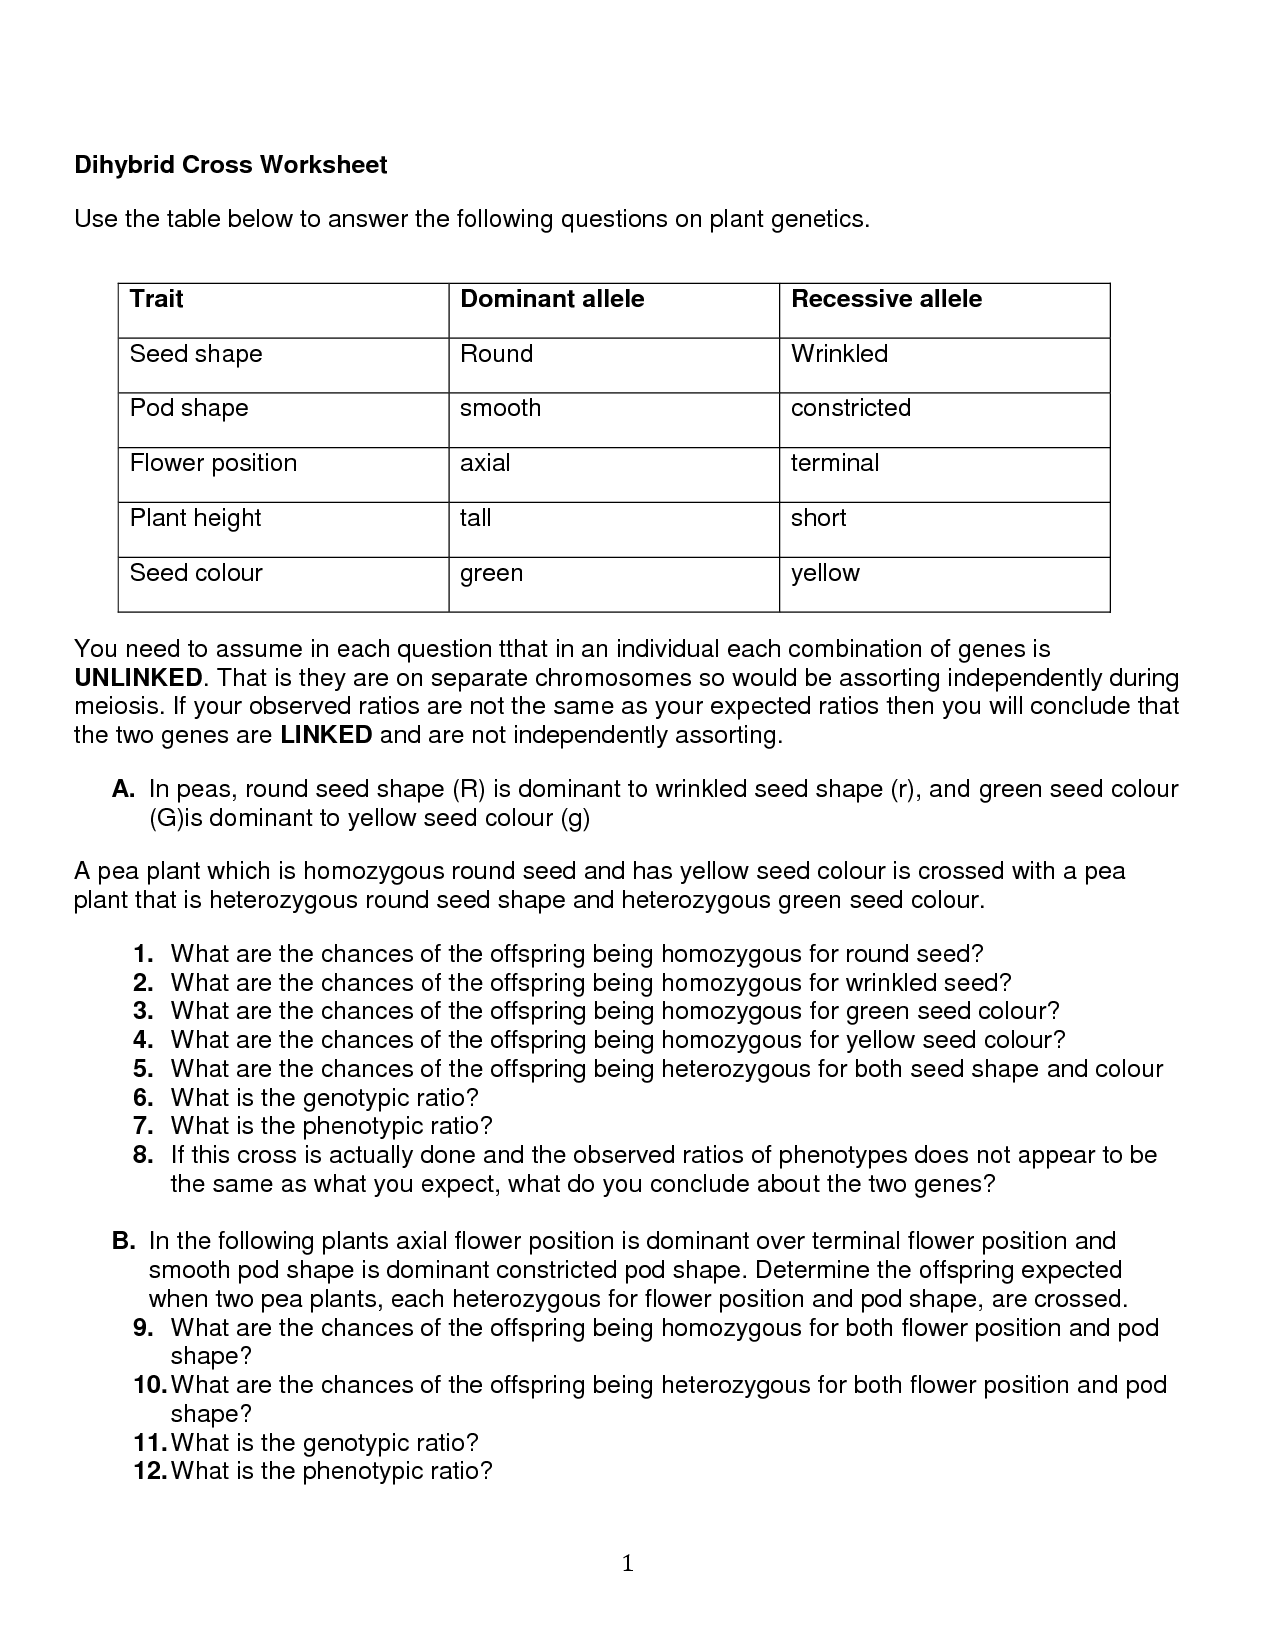 19-best-images-of-dihybrid-worksheet-with-answer-key-dihybrid-cross-worksheet-answer-key